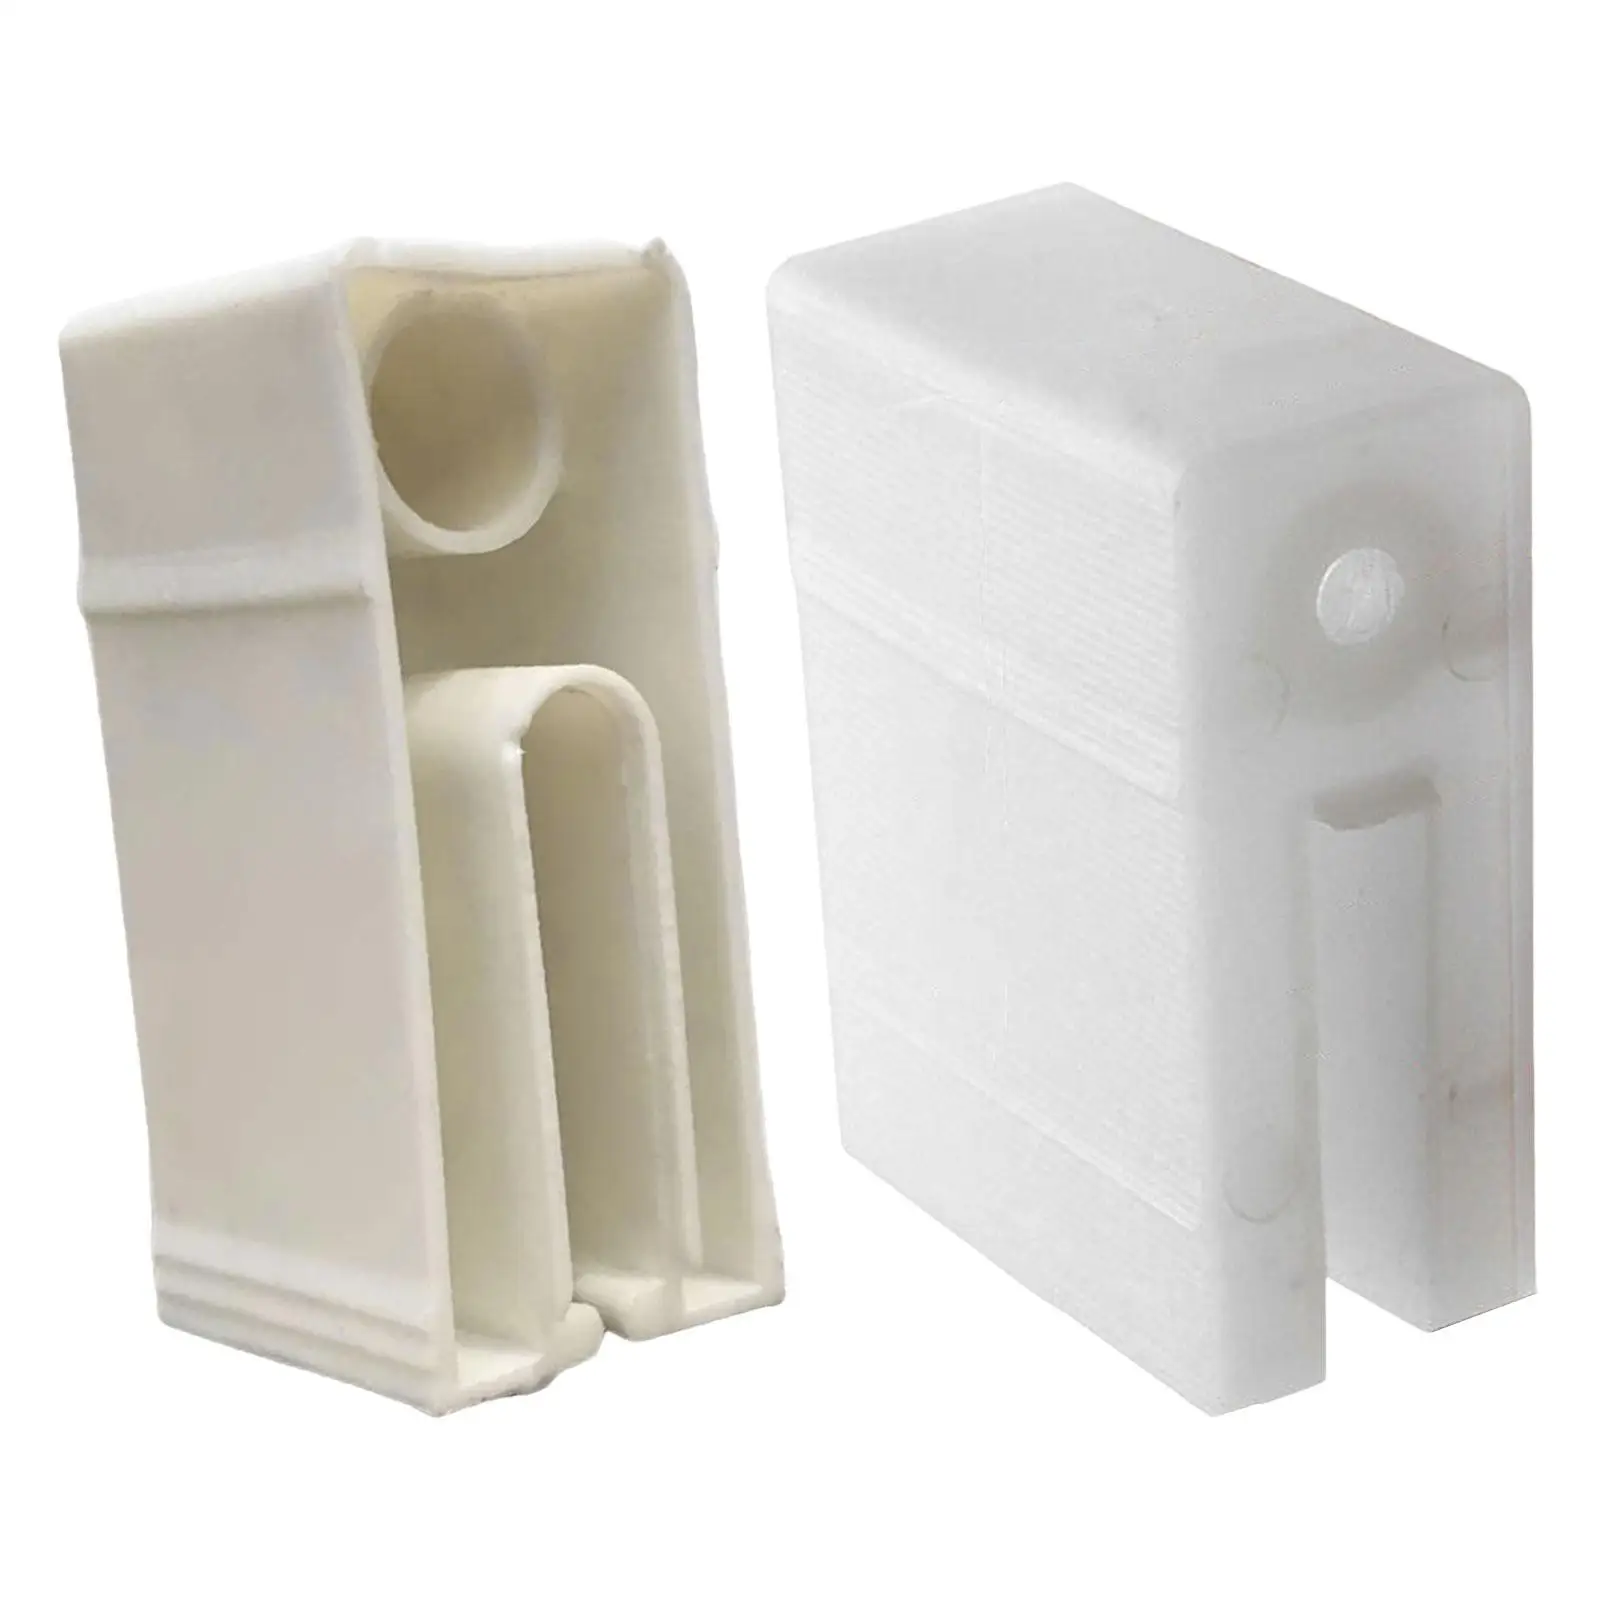 Sliding Window and Door Blocks Replacement Part Easy to Install Window Accessory for Windows Offices Household Doors Shops